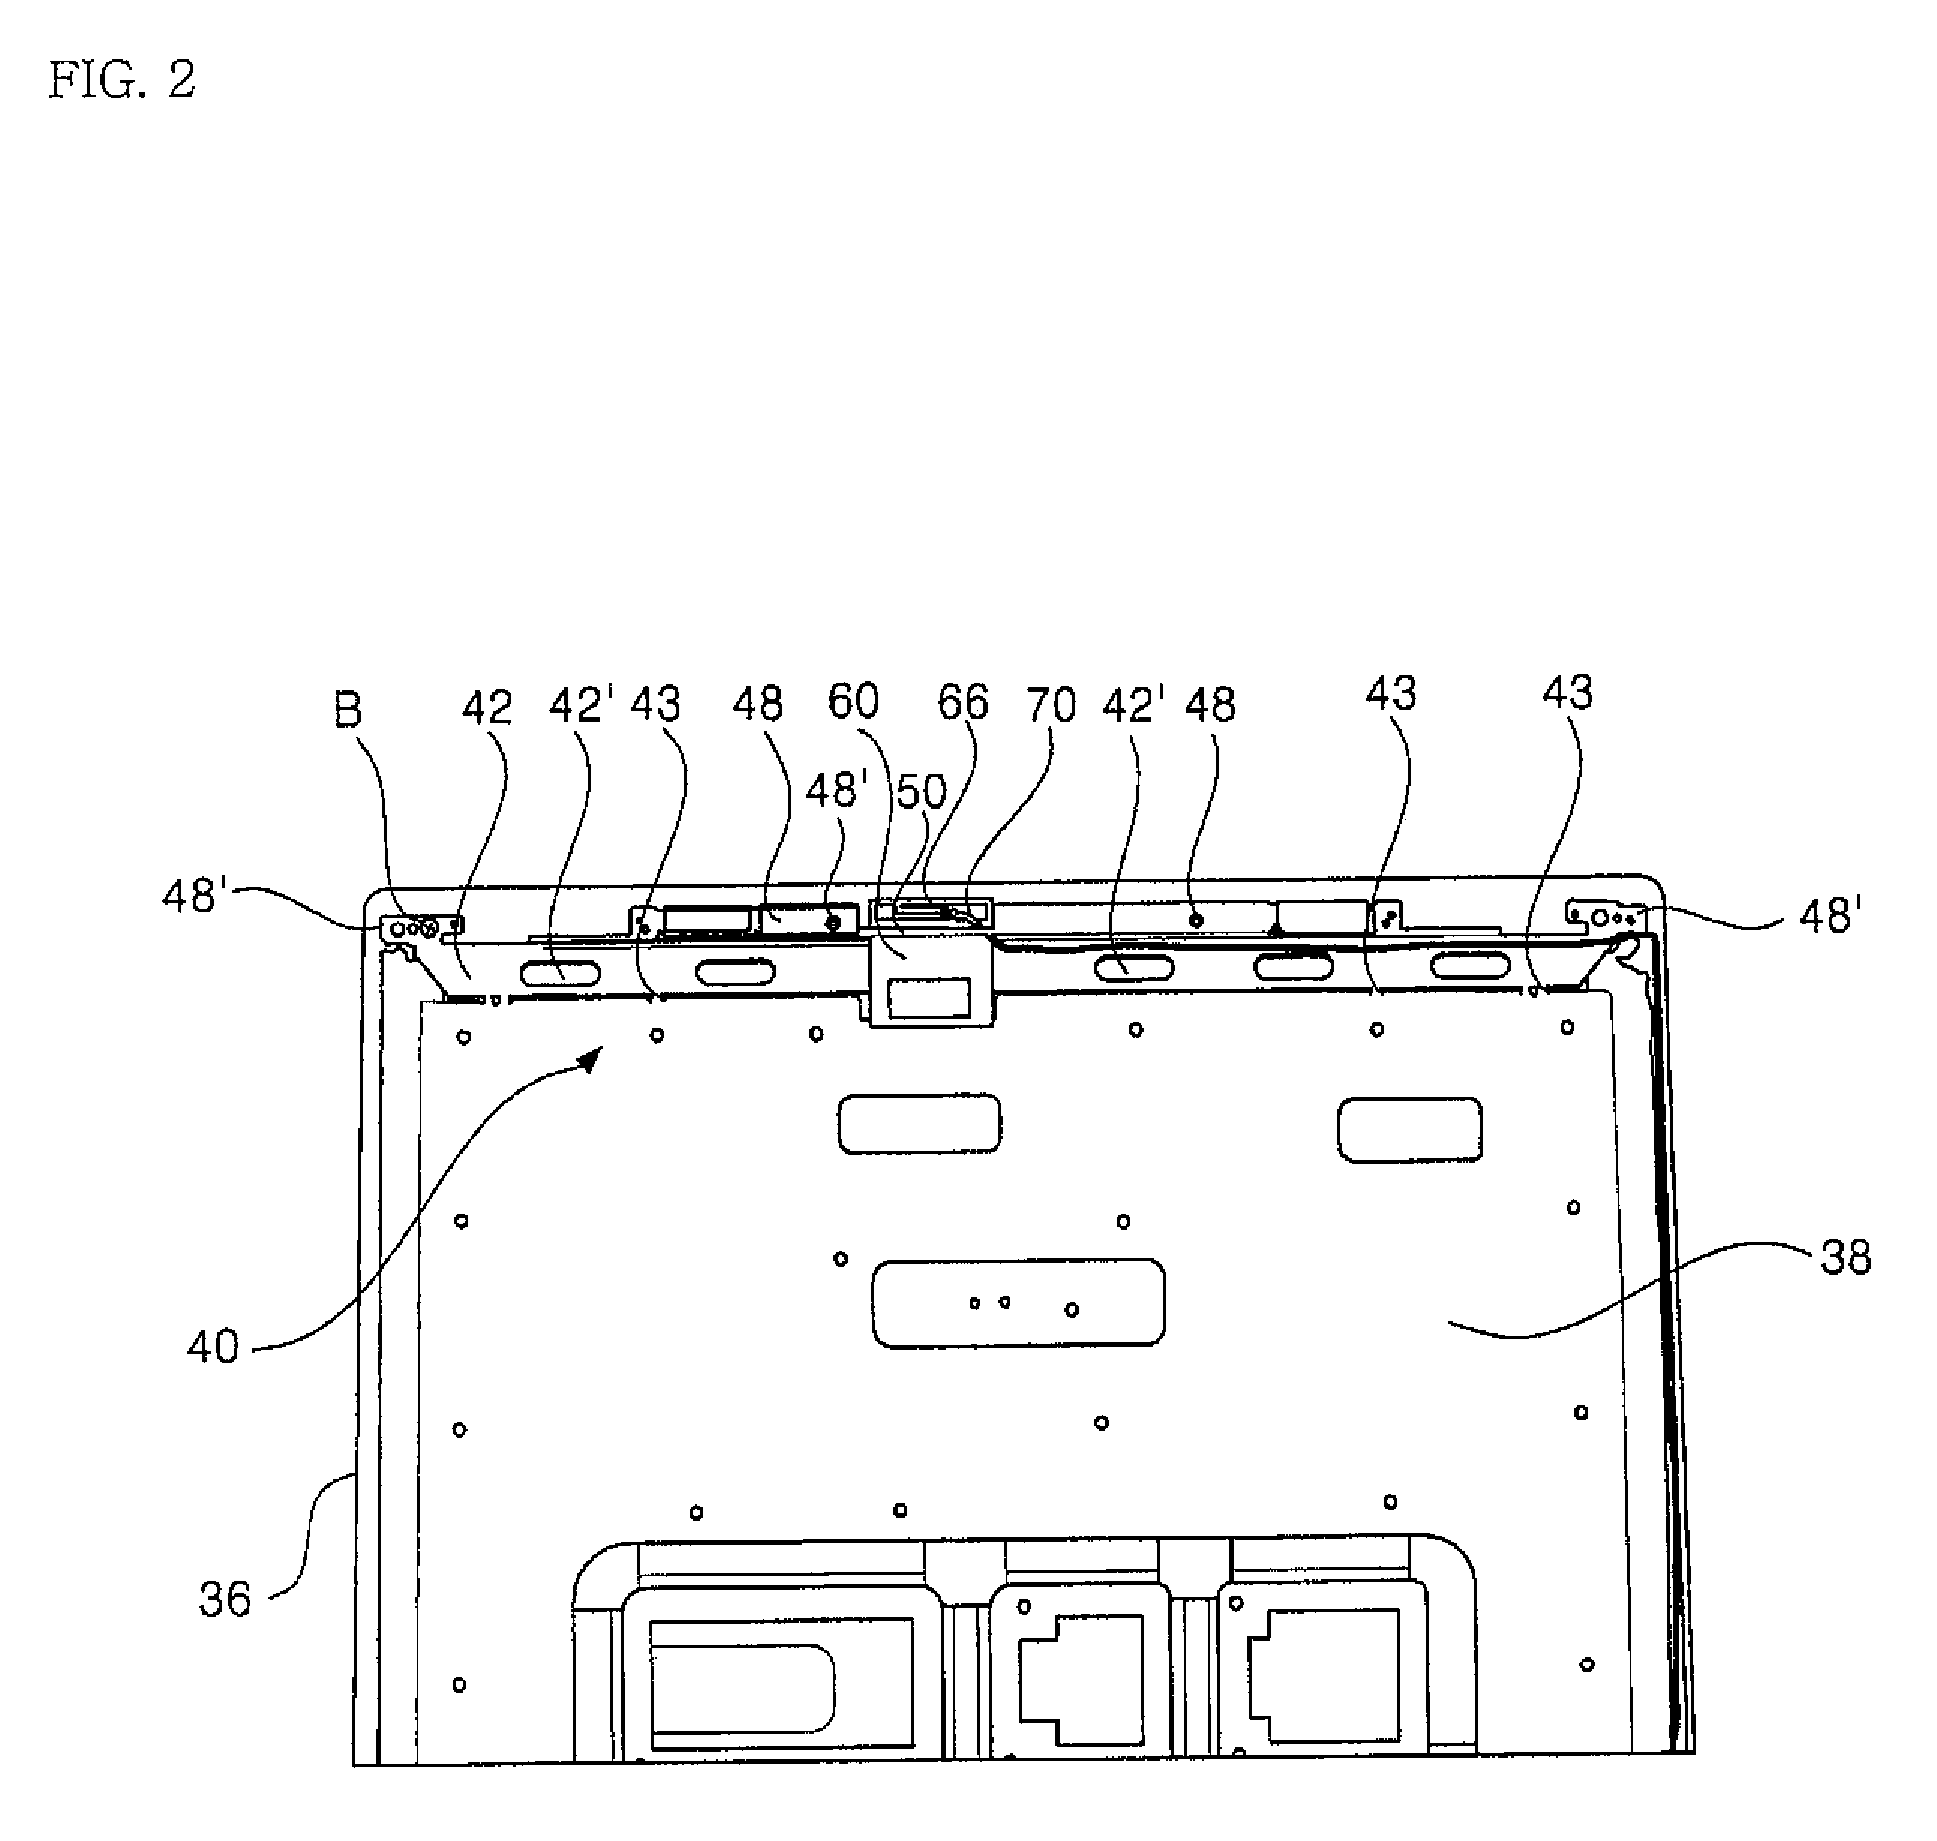 Support frame for display and support structure for display having the same